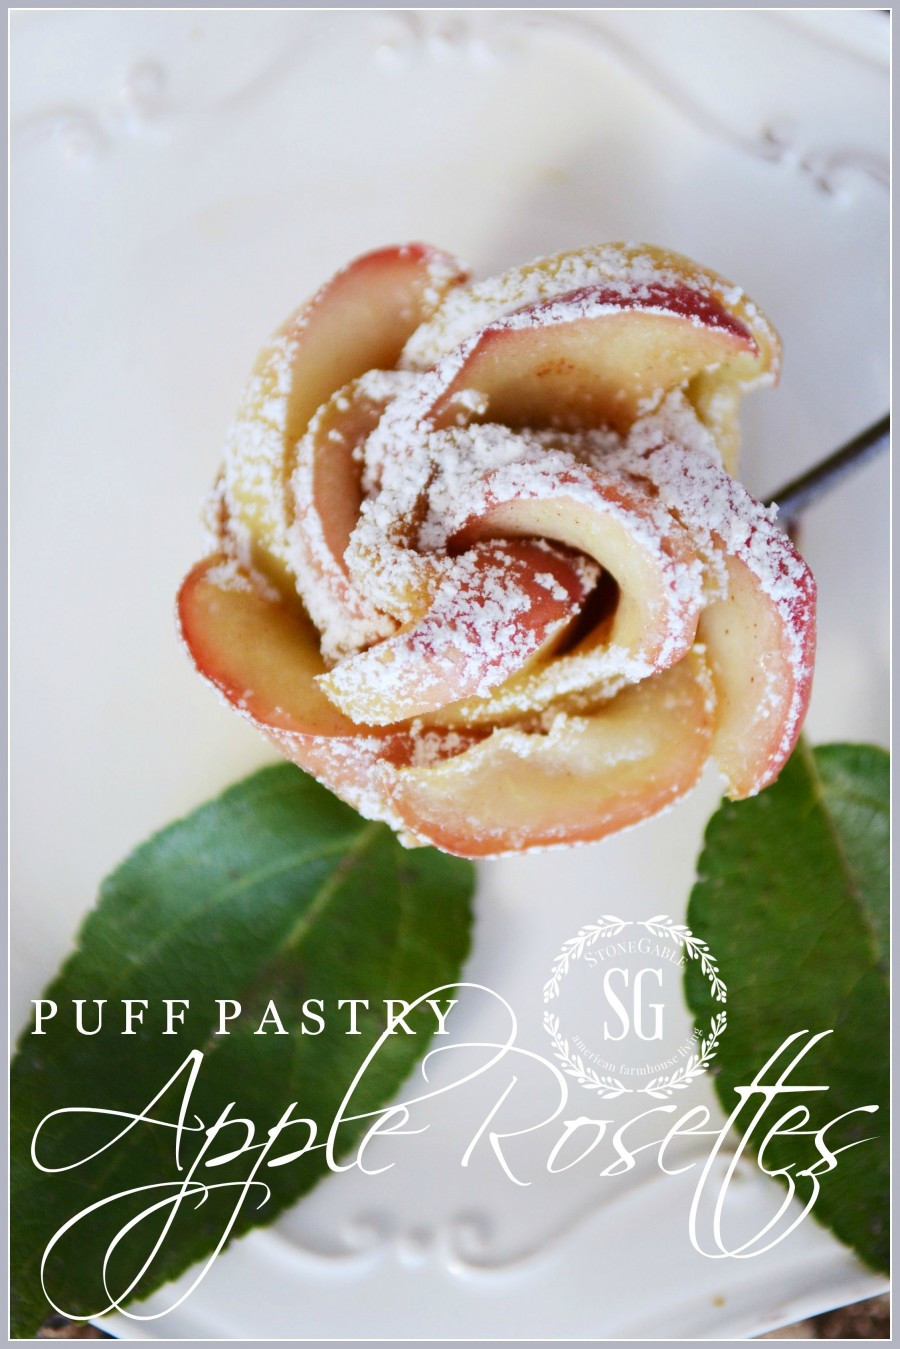 Puffed Pastry Recipes Desserts
 10 SCRUMPTIOUS PUFF PASTRY RECIPES StoneGable